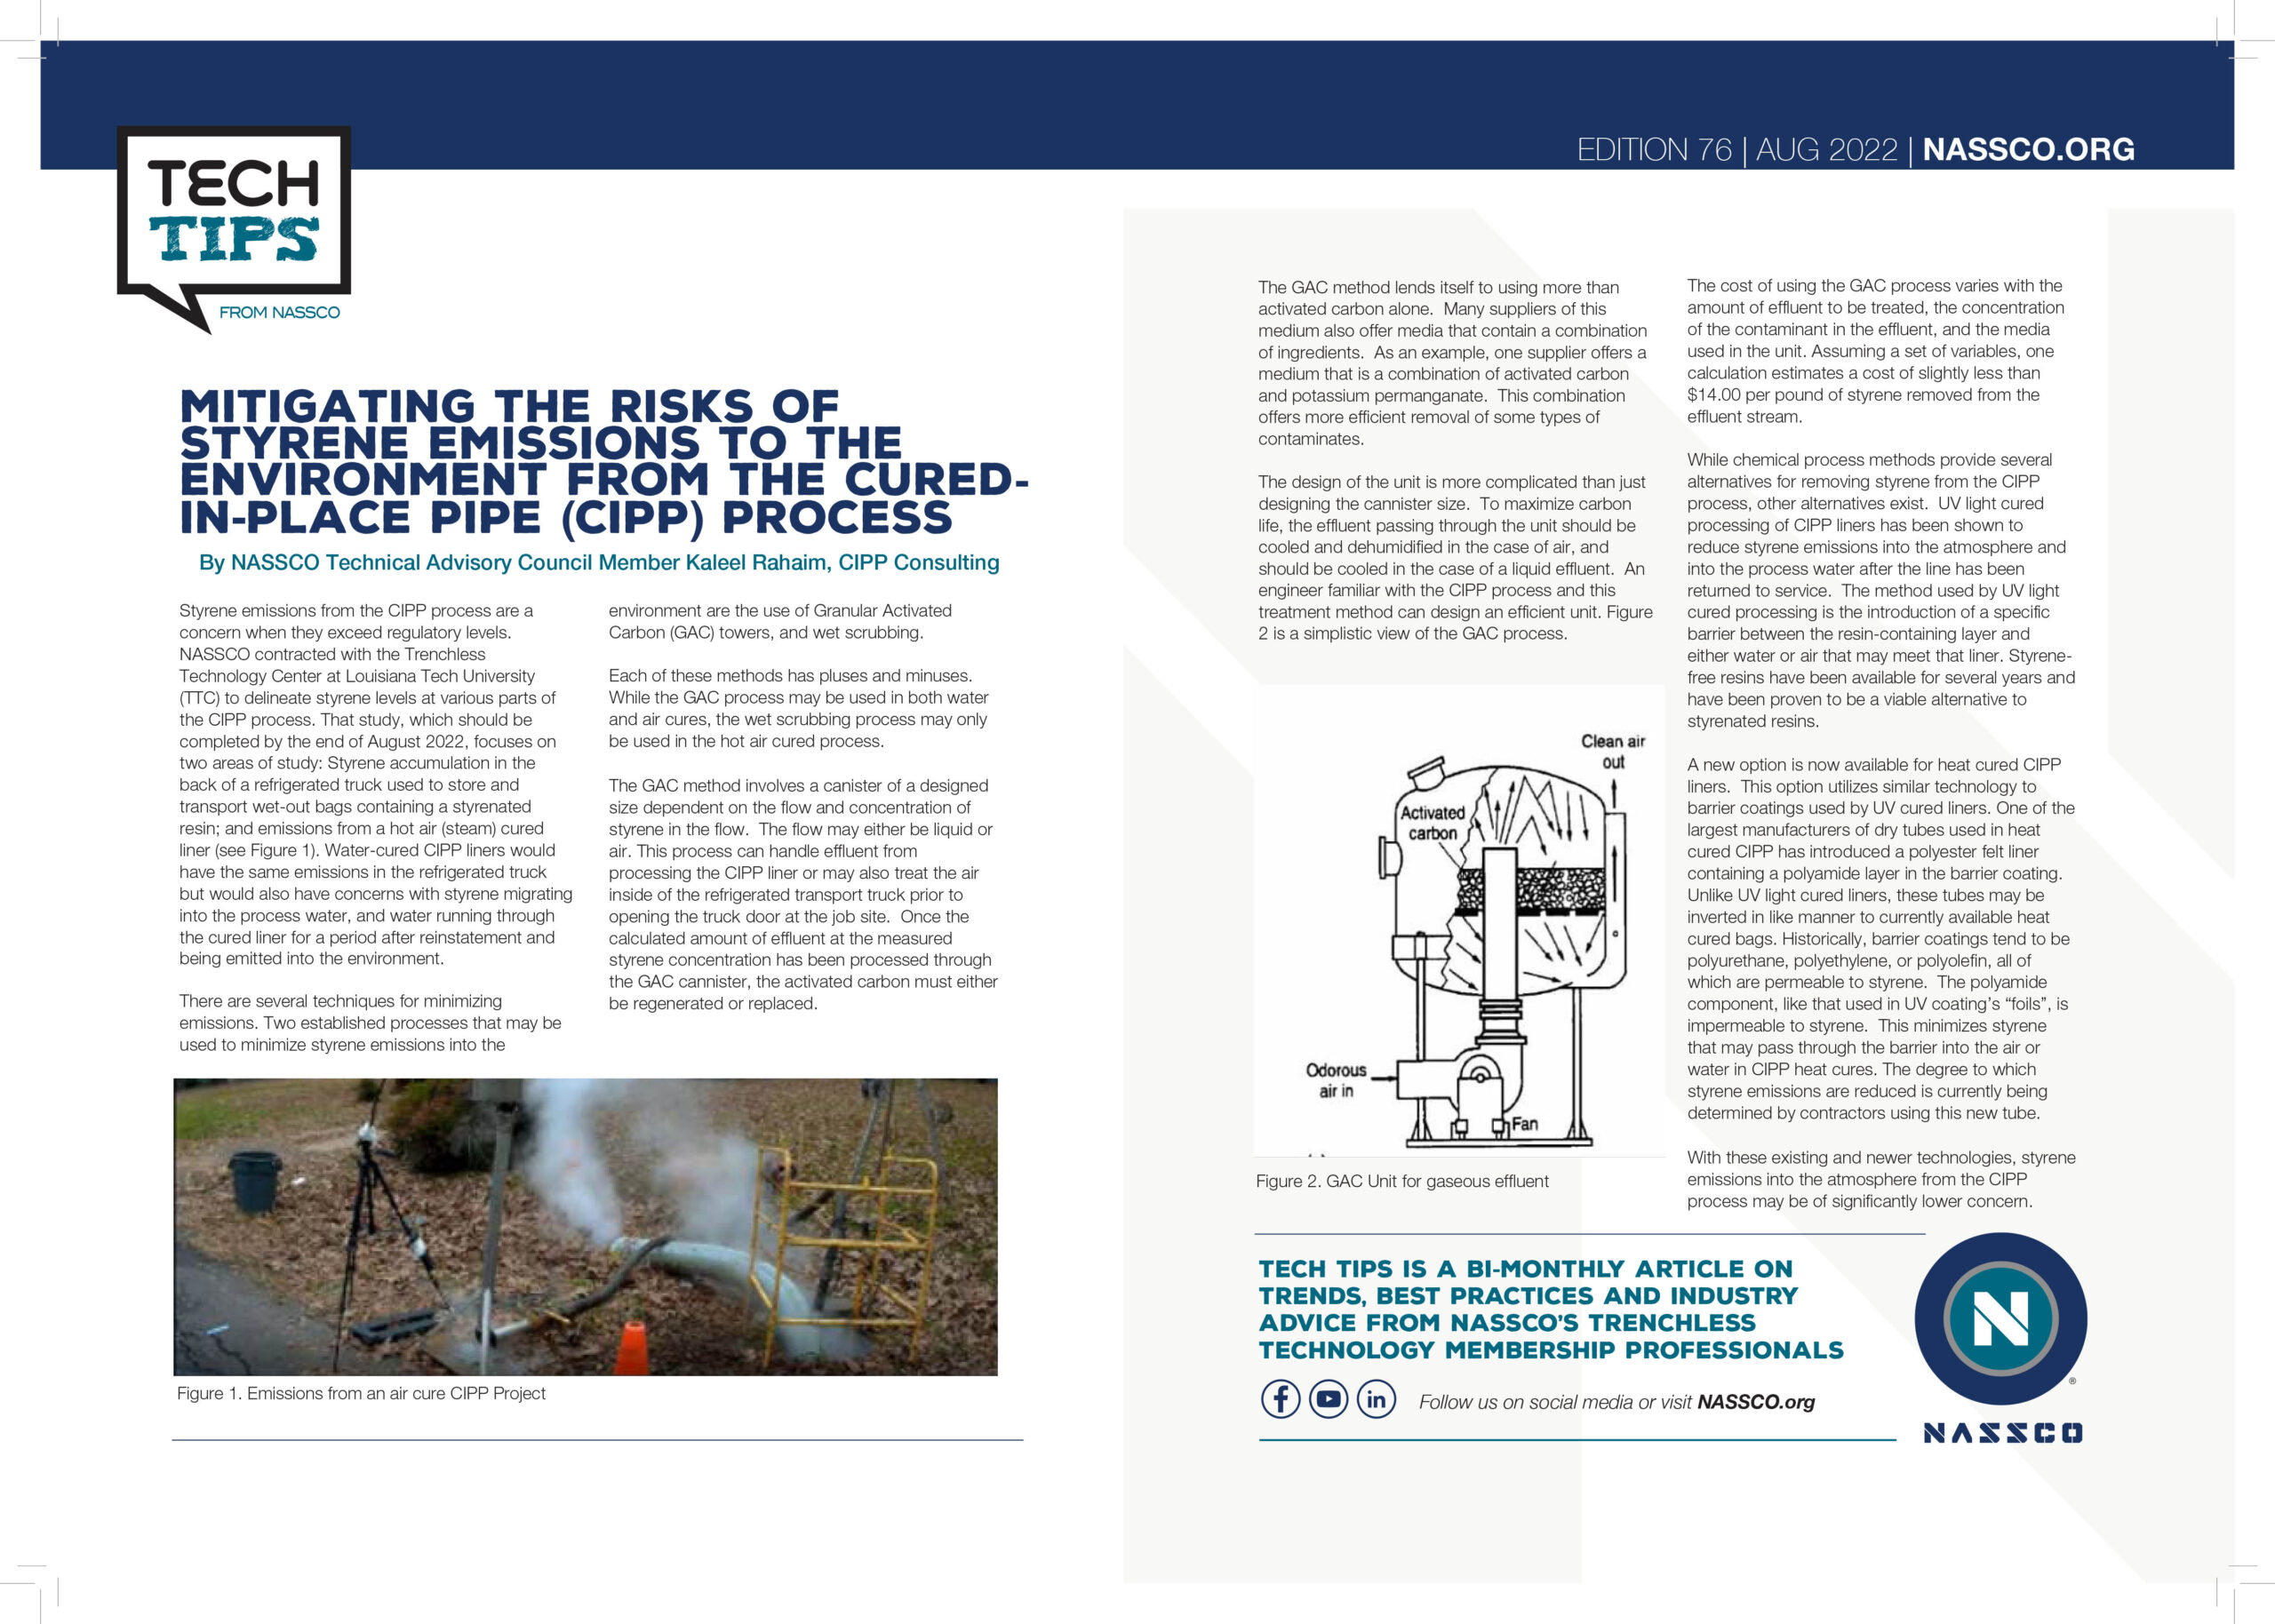 Mitigating the Risks of Styrene Emissions to the Environment from the Cured-in-Place Pipe (CIPP) Process